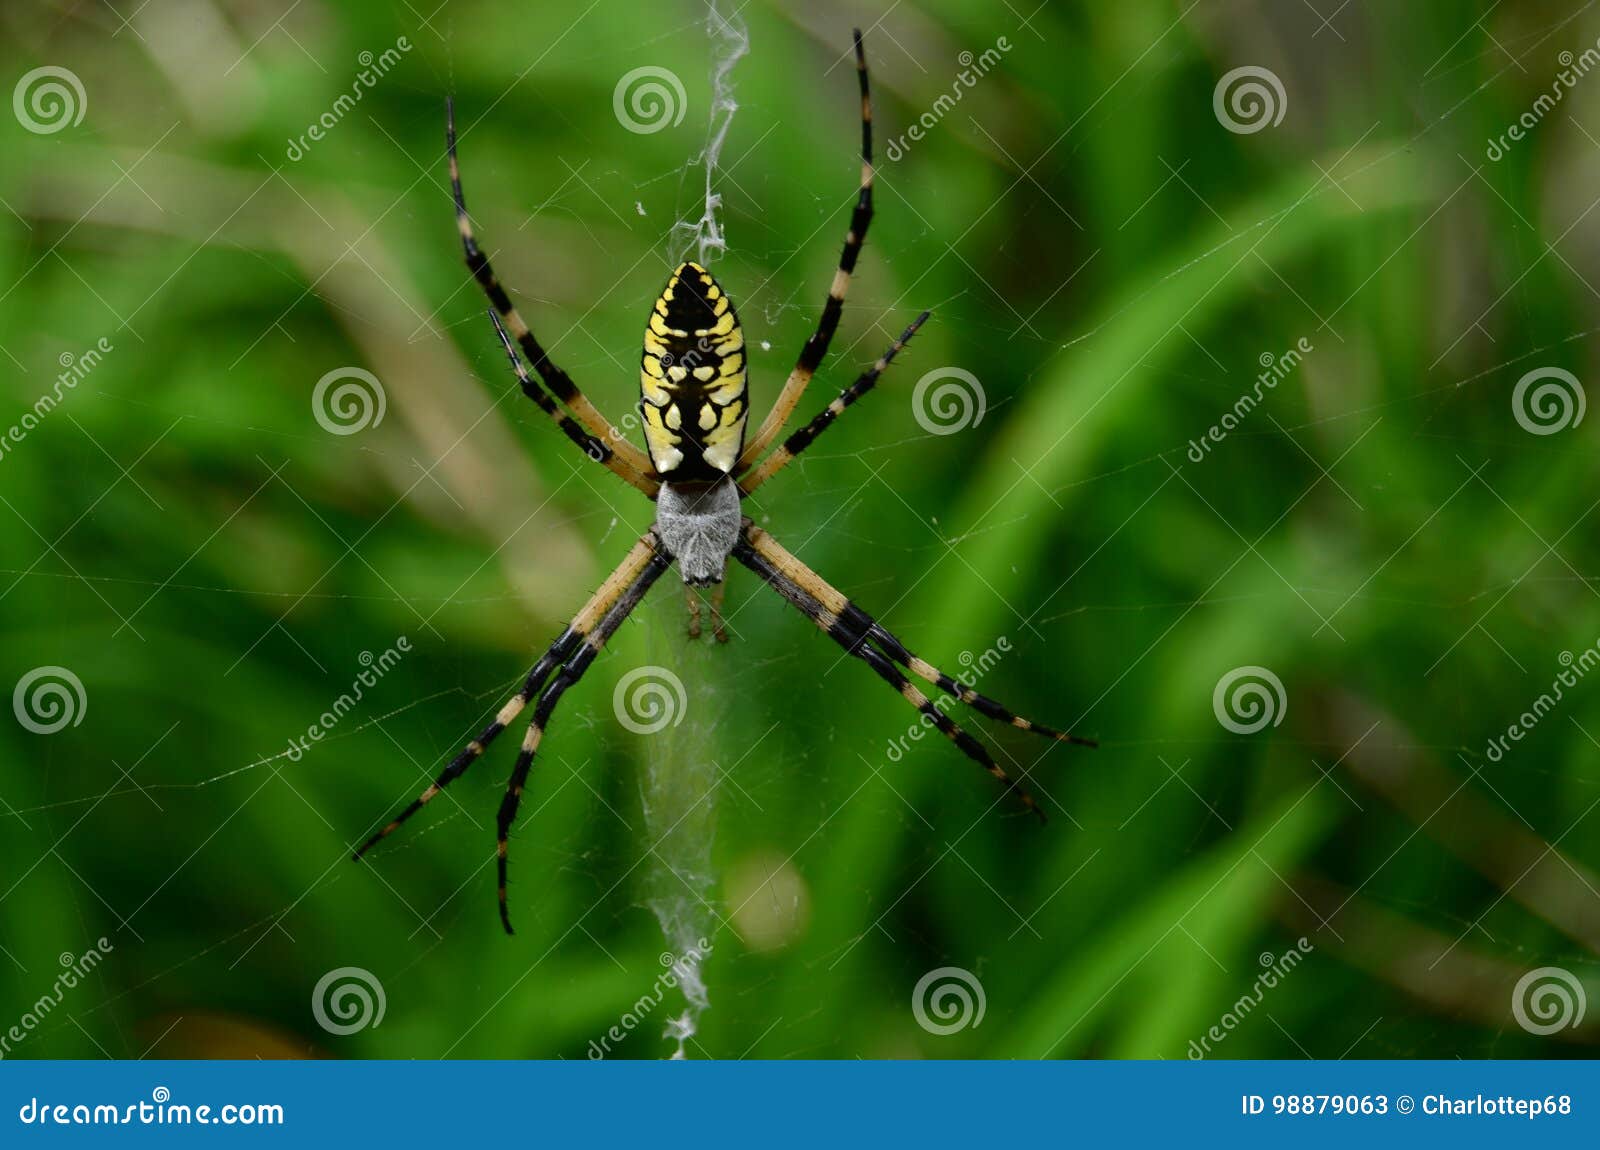 Black And Yellow Garden Spider Stock Image Image Of Harmless